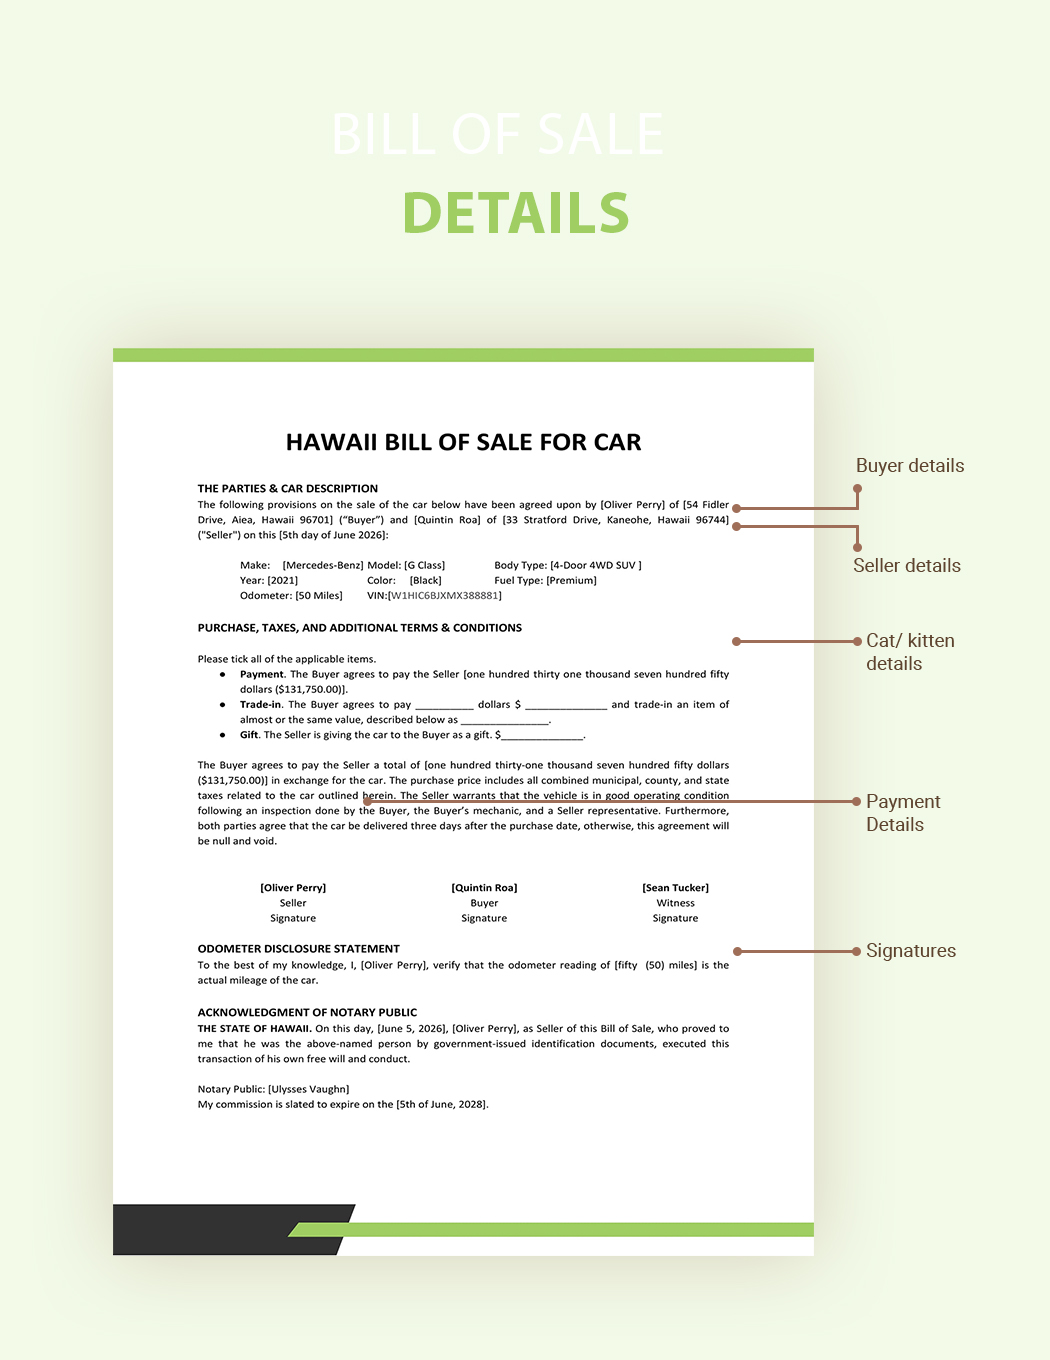 Hawaii Bill of Sale For Car Template